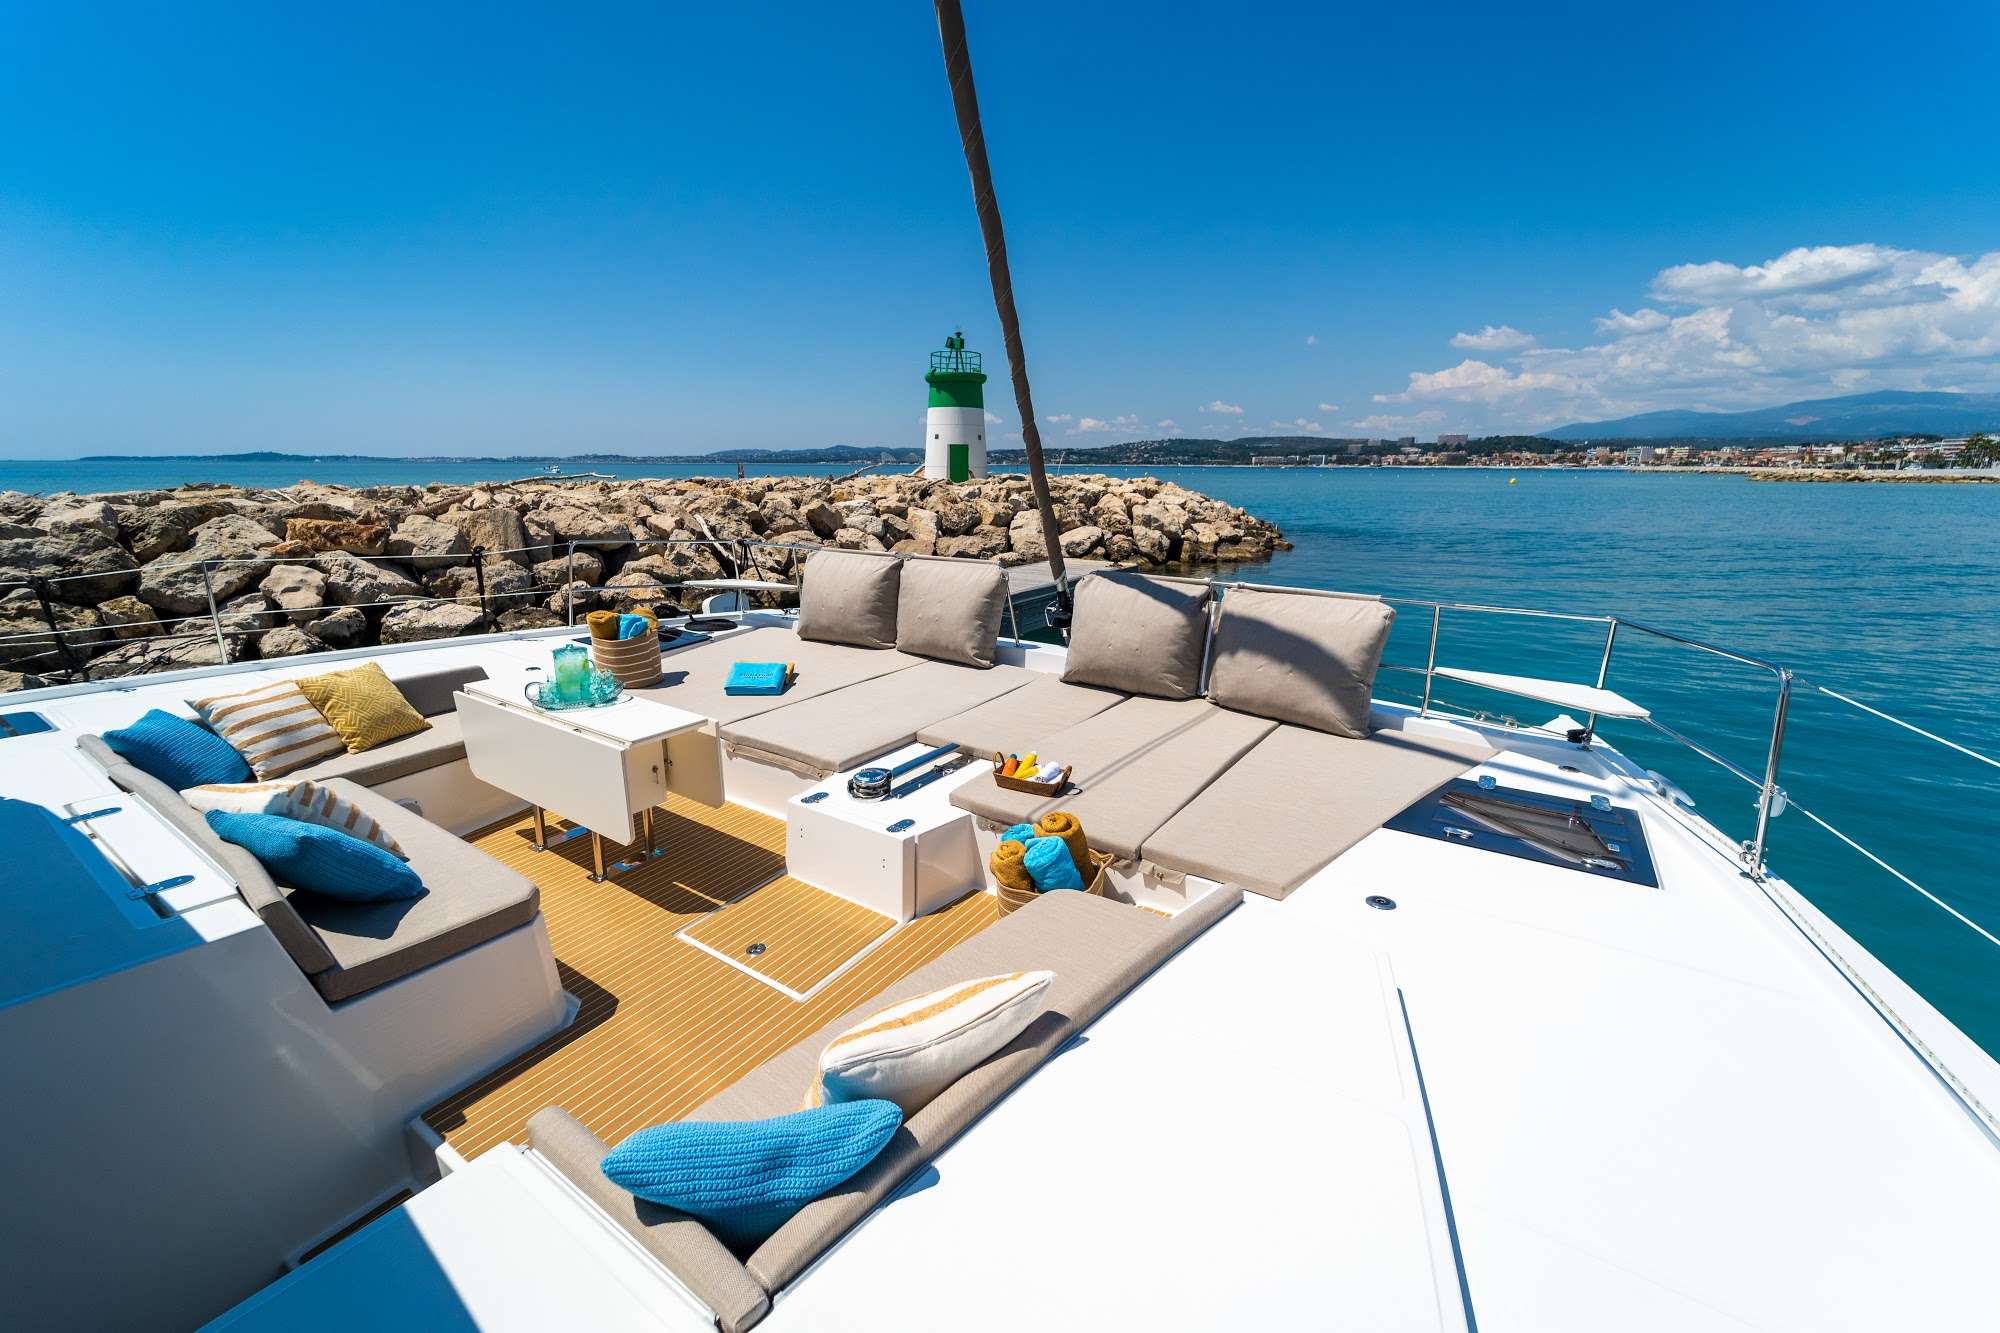 Signature Vision - Yacht Charter Rodi & Boat hire in Europe (Spain, France, Italy) 4